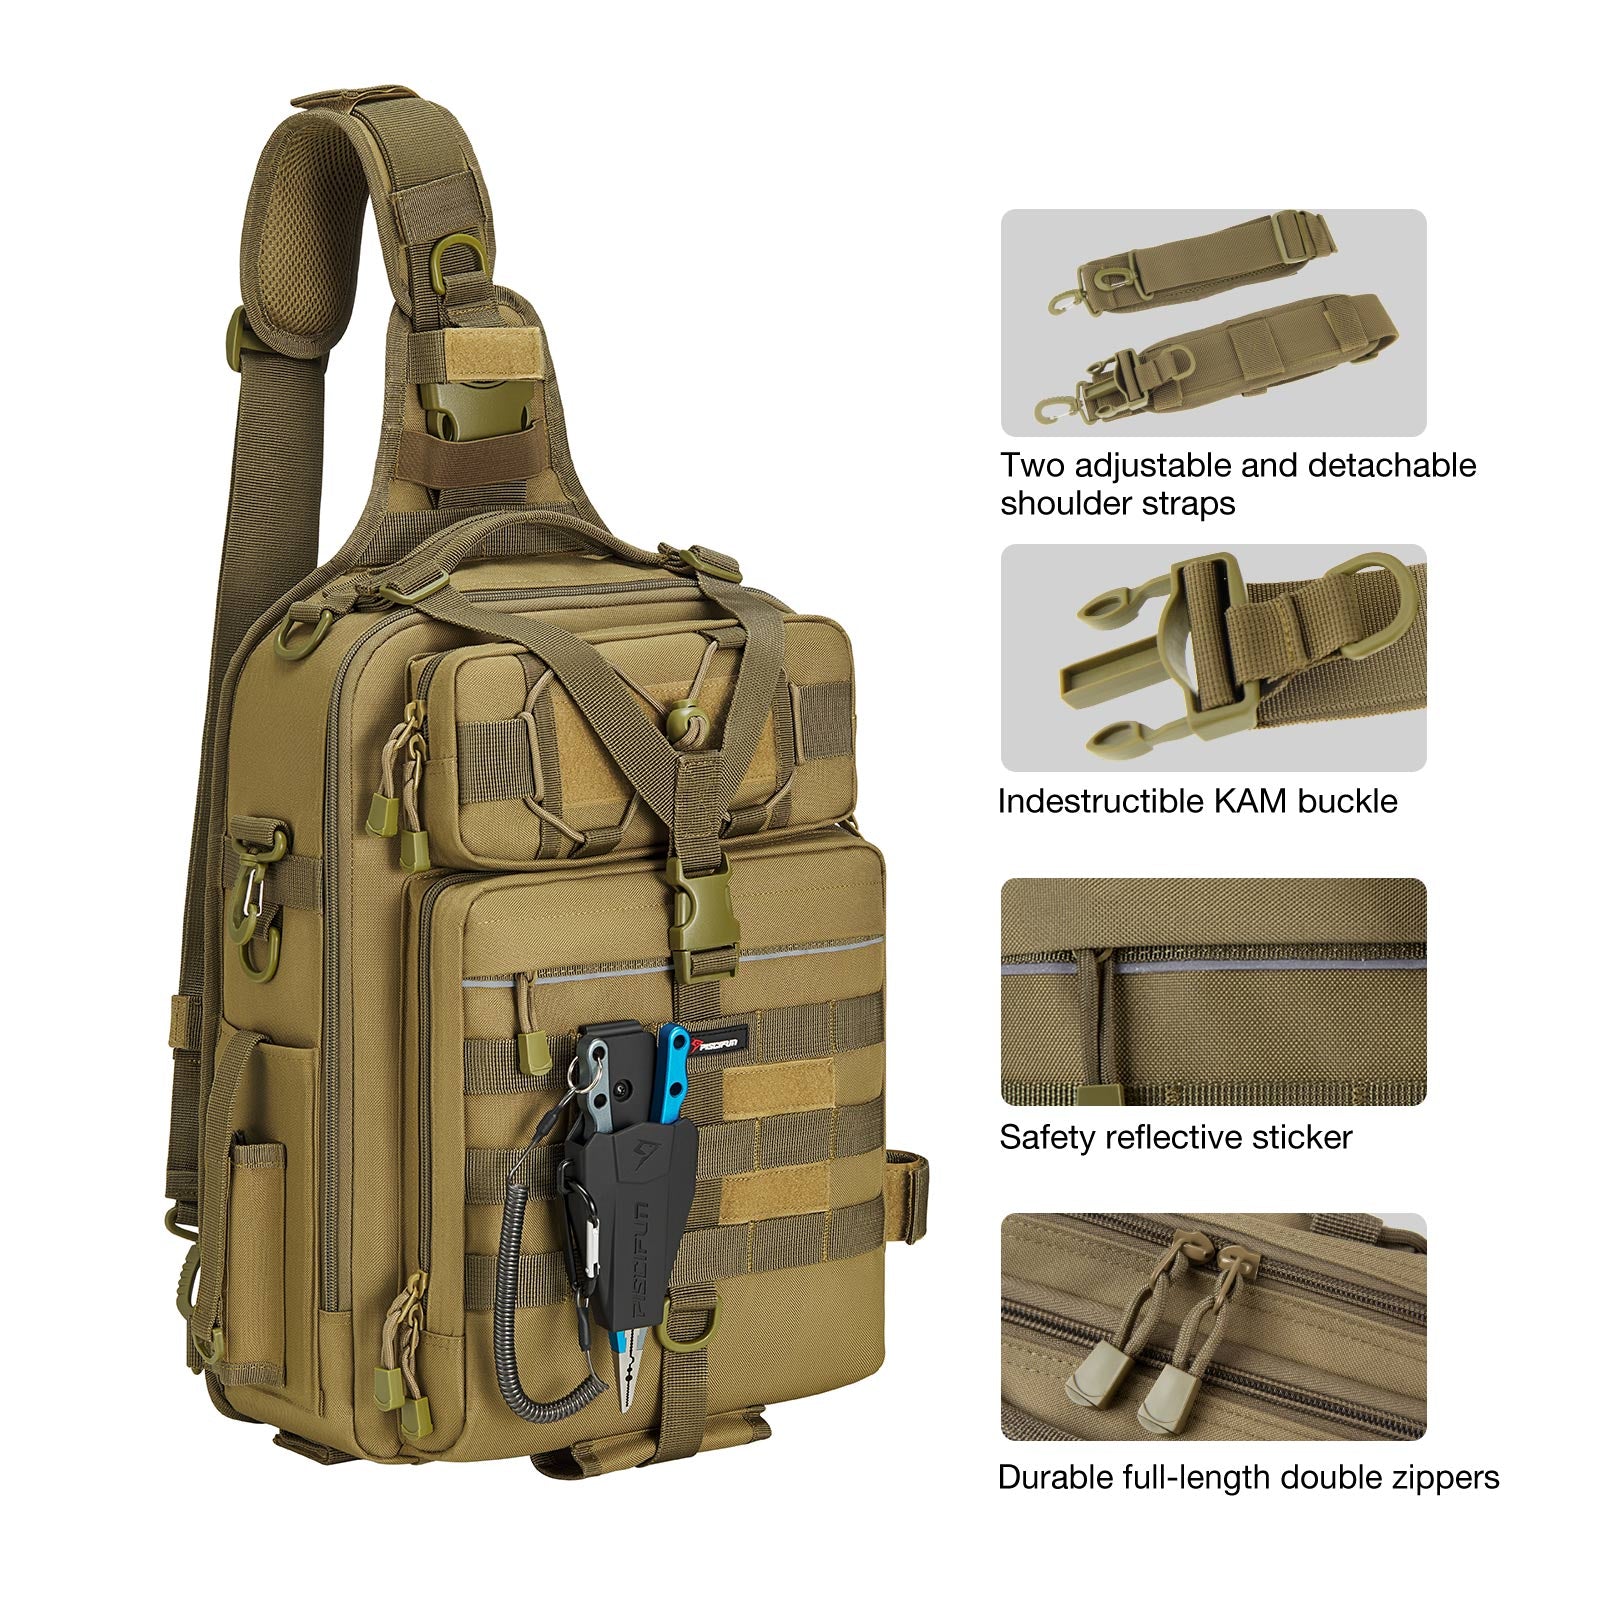  Piscifun Fishing Tackle Bag with Adjustable Waist Strap,  Portable Multi-function Fanny Fishing Storage Pack, Water-Resistant Outdoor  Fly Fishing Bag, Small Fishing Bag (Army Green) : Sports & Outdoors